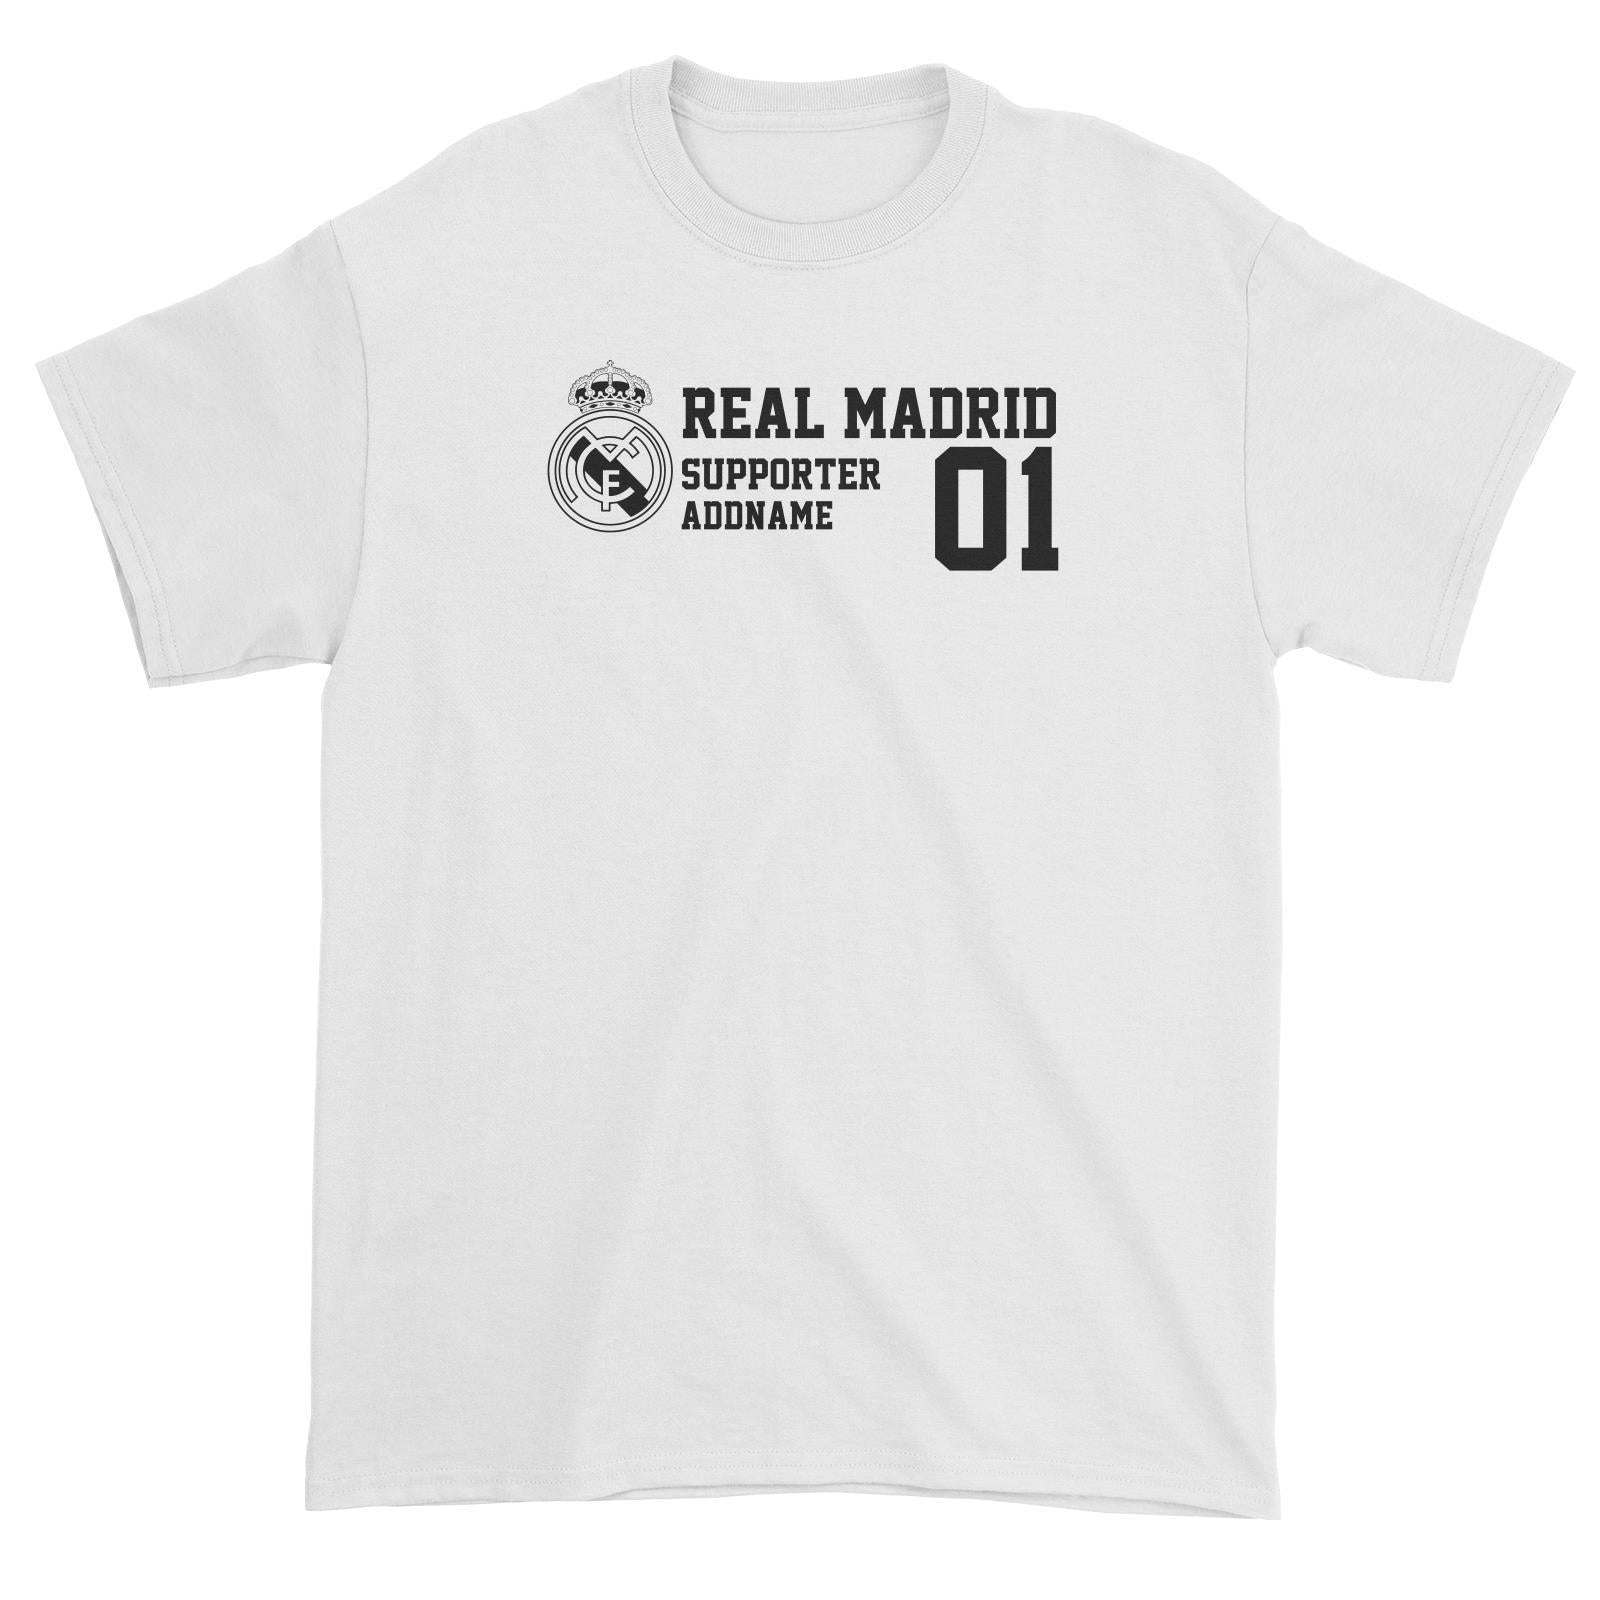 Real Madrid Football Supporter Addname Unisex T-Shirt